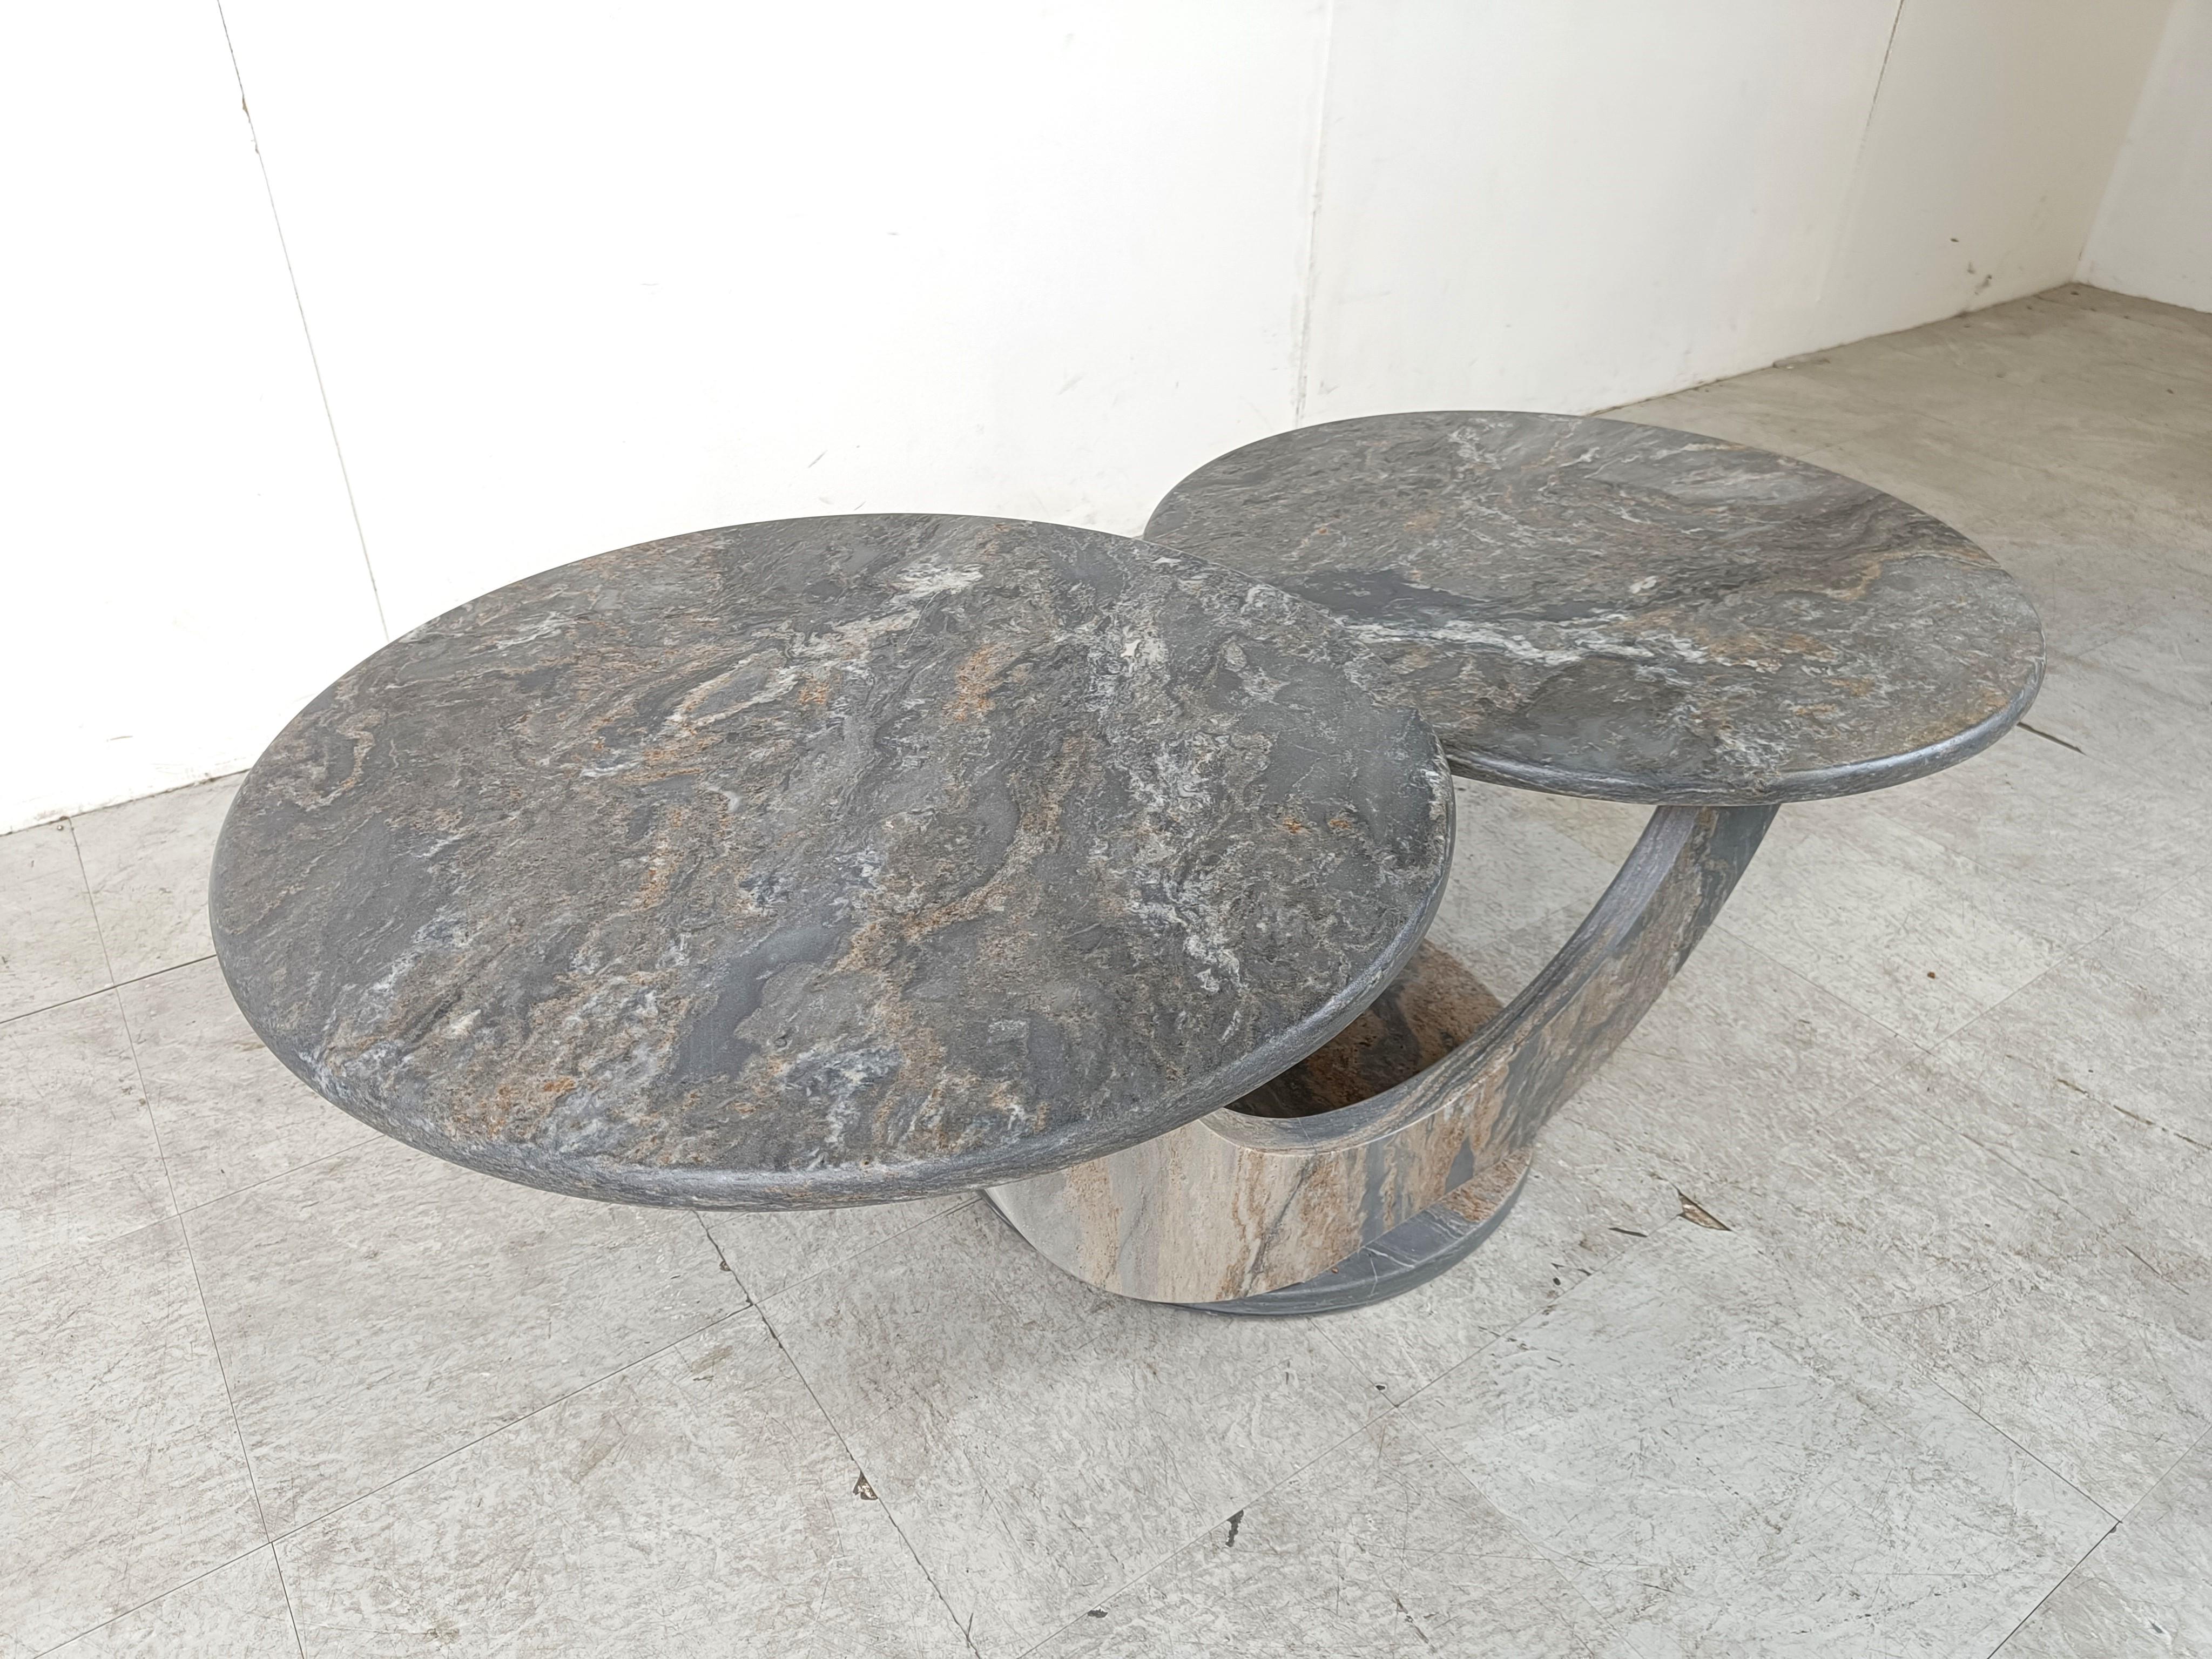 Timeless marble coffee tables with two round tops.

Beautiful arched base and attractive natural vains in the stone.

Good condition.

1970s - Italy

Dimensions:
Height: 42cm/16.53